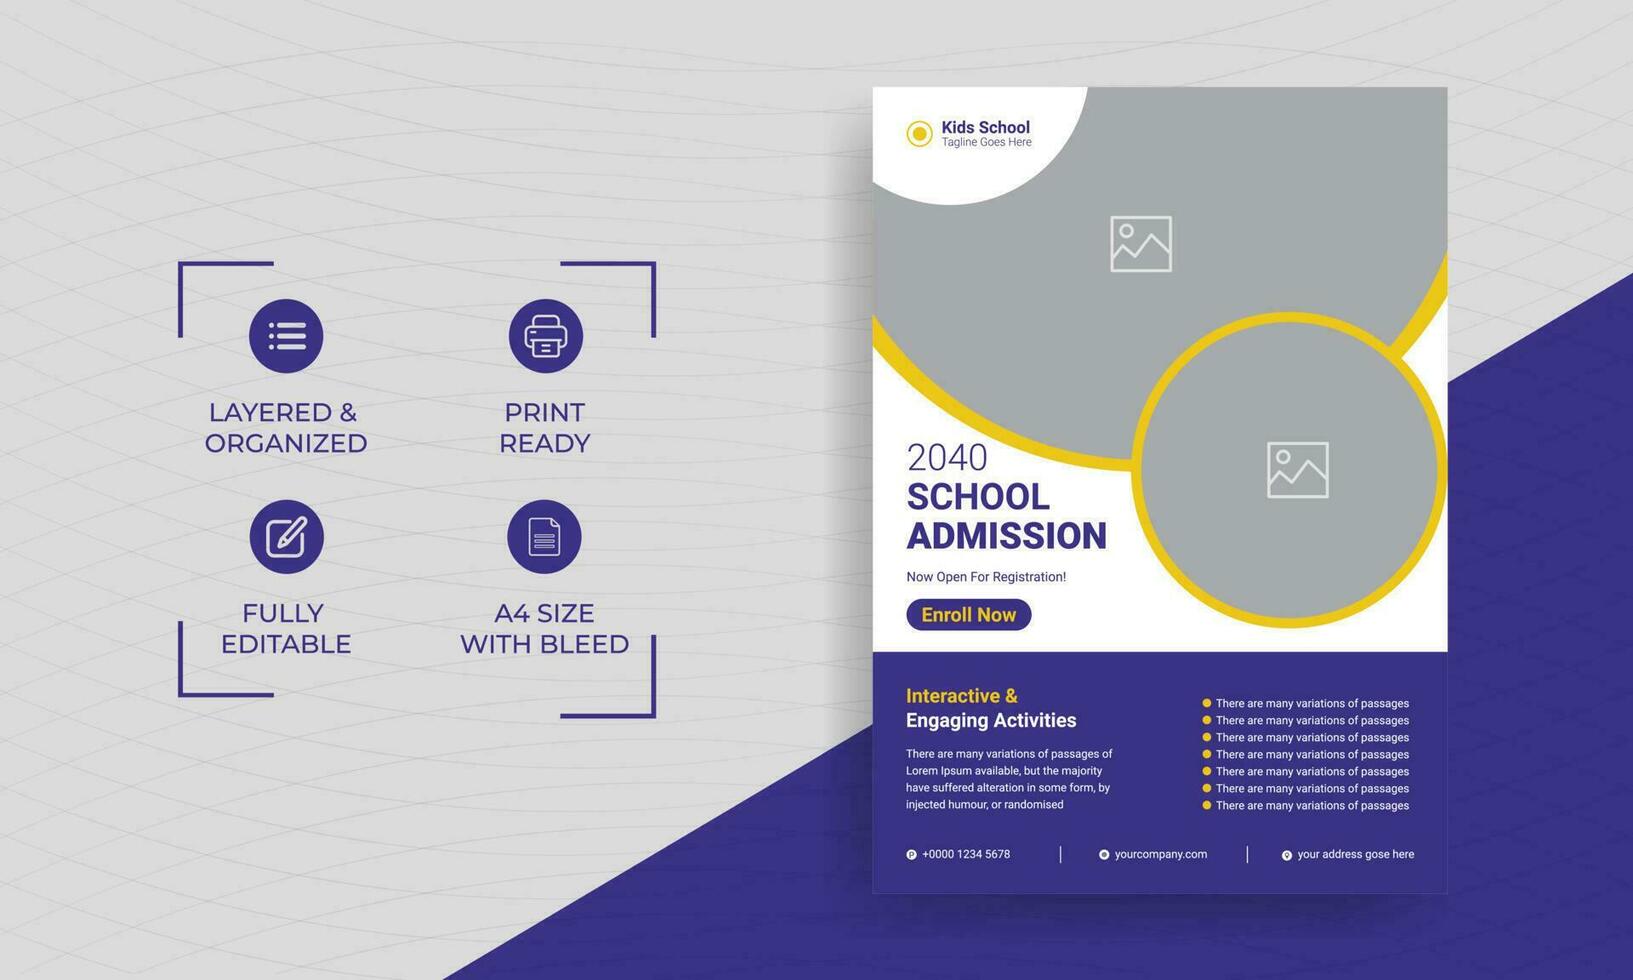 School admission kids education flyer template. Kids back to school education admission flyer poster layout template vector